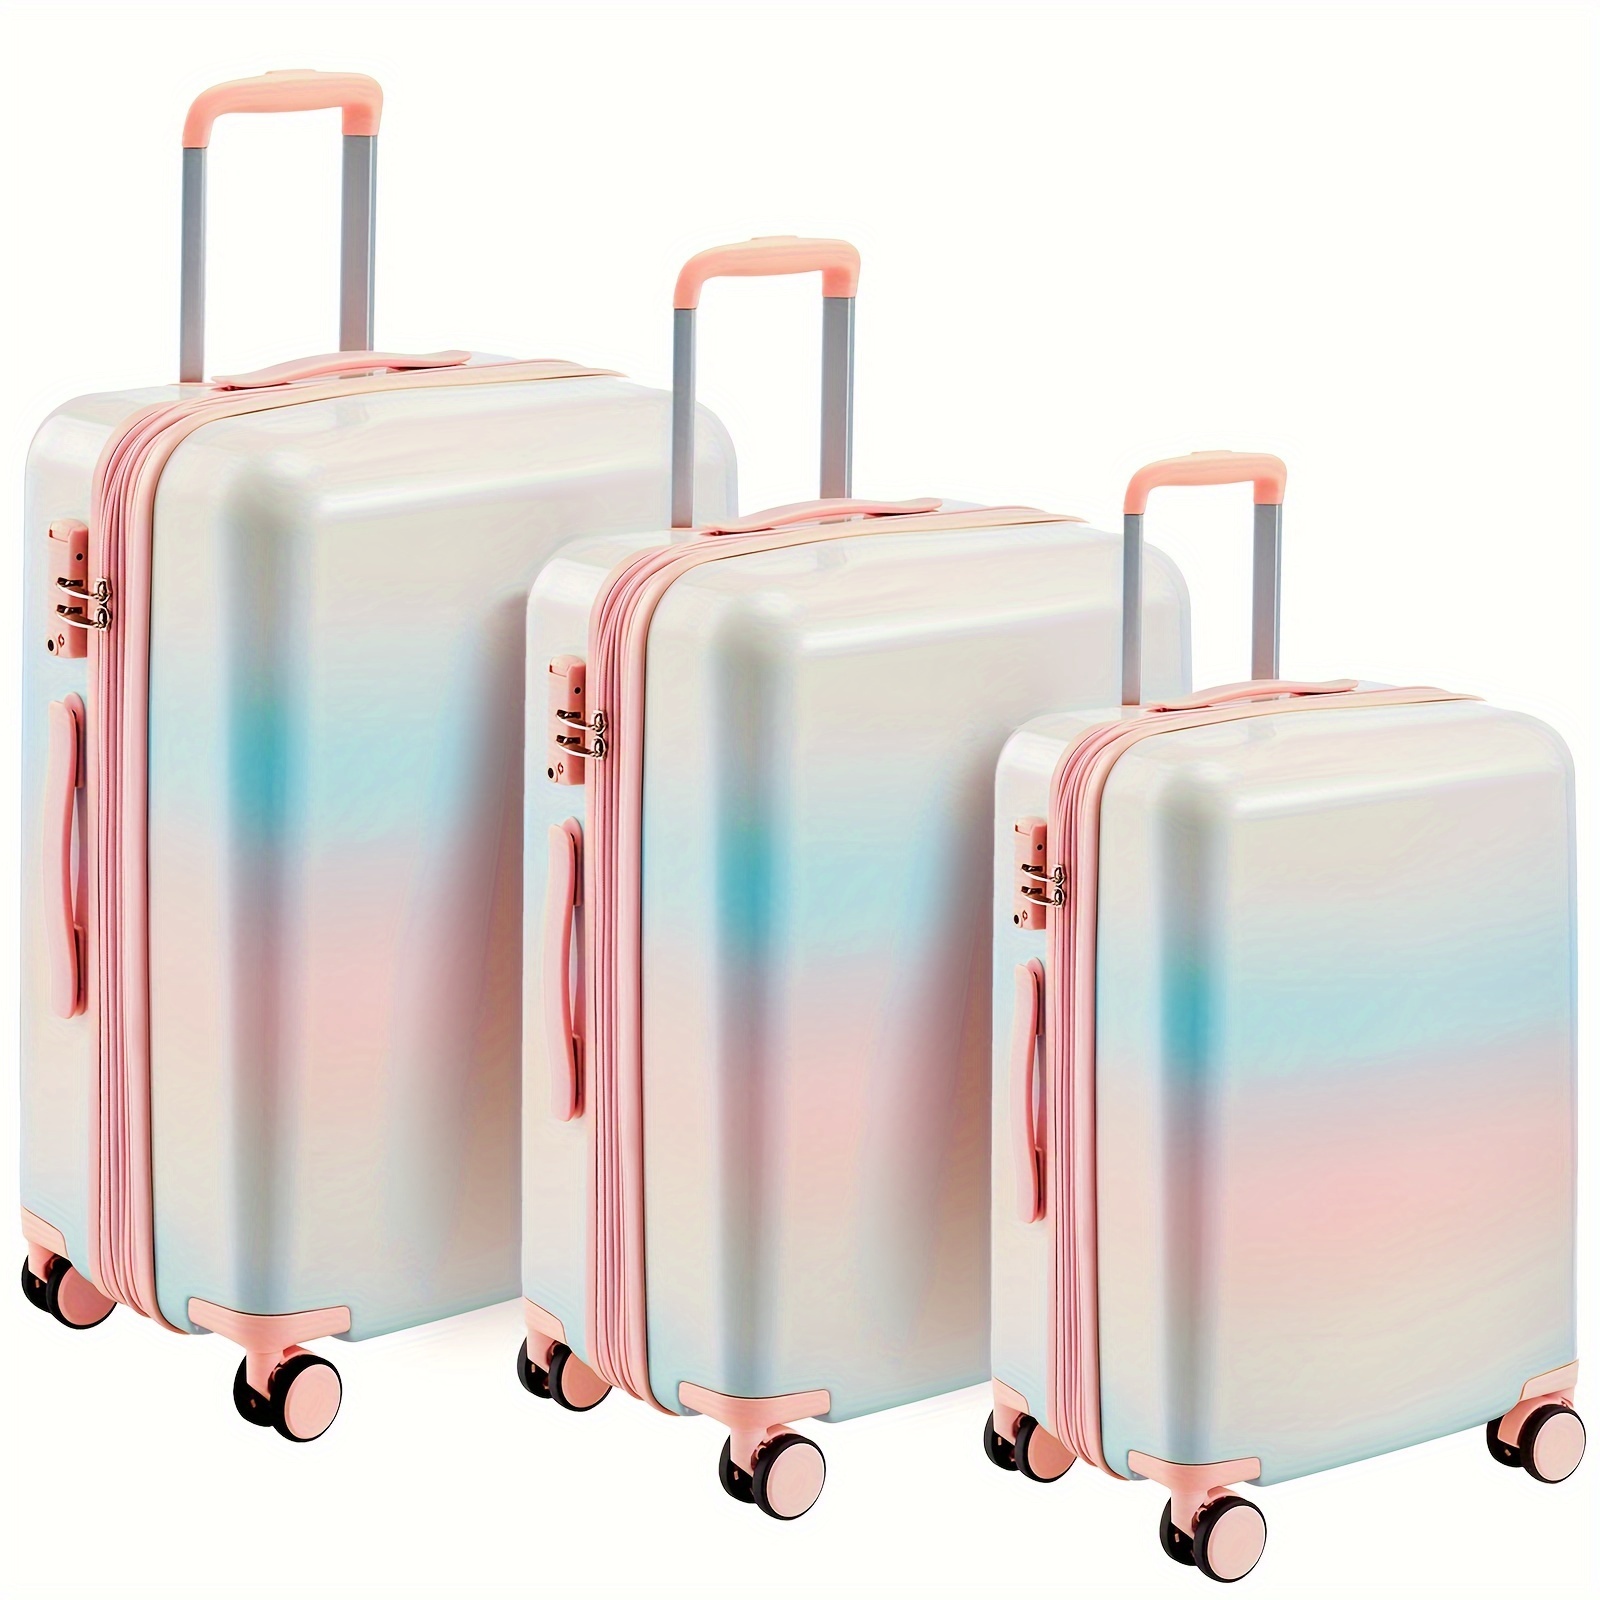 

3-piece Durable Hardshell Pc Luggage Set - Smooth-glide 8-wheel Spinners With Tsa Lock - Ultra-lightweight & Secure, Perfect For All Your Travel Needs